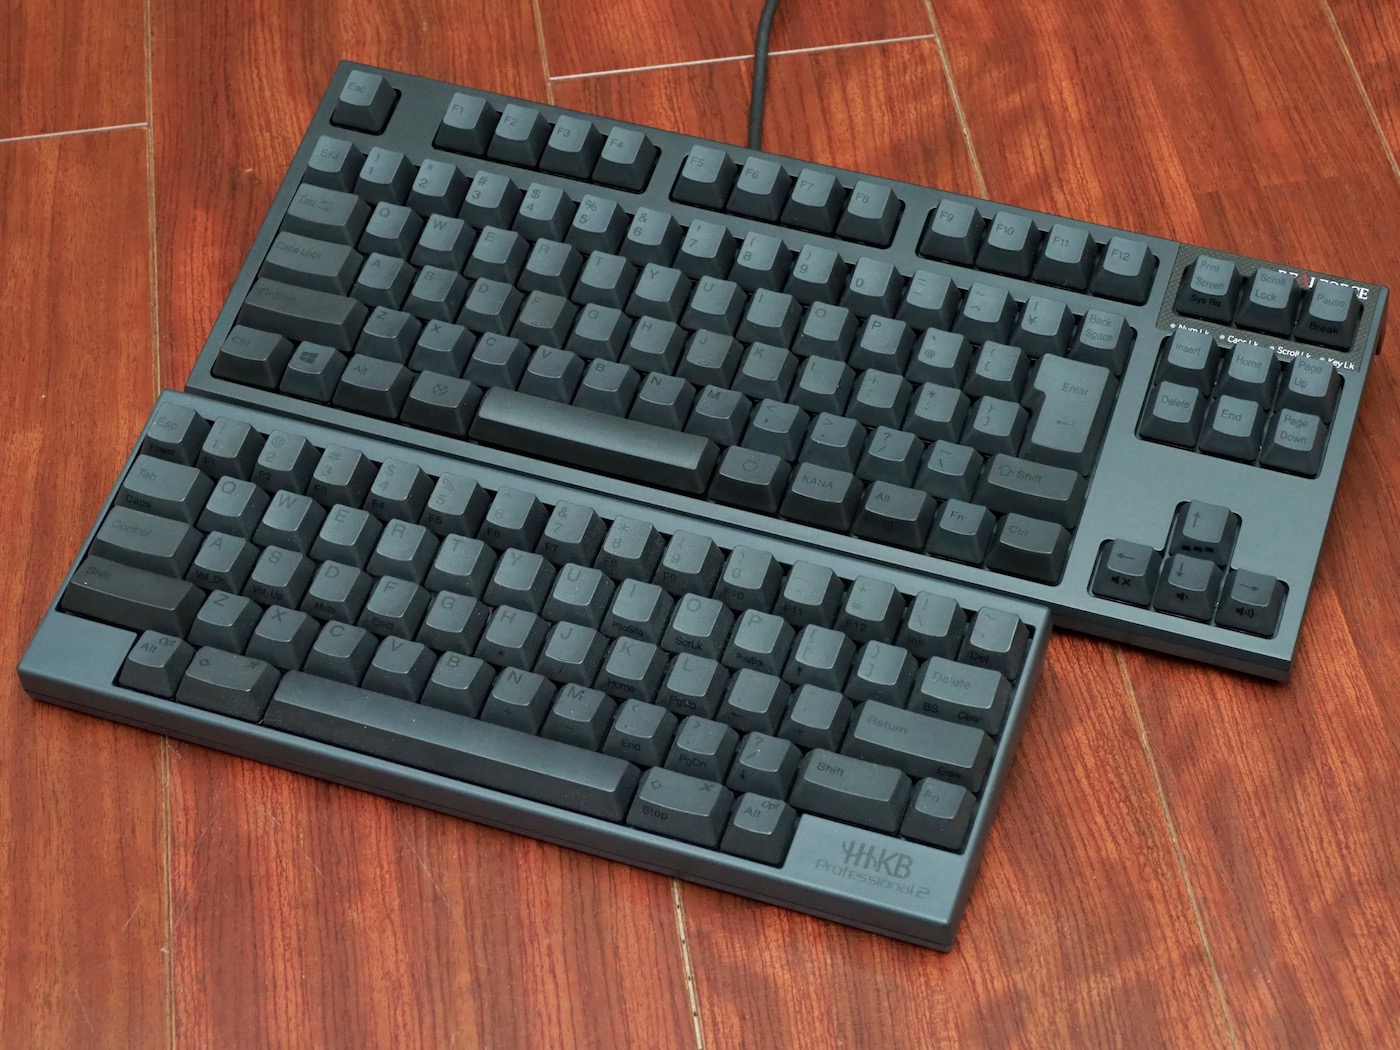 REALFORCE R2 PFU Limited Edition」第2世代REALFORCEに英語配列 